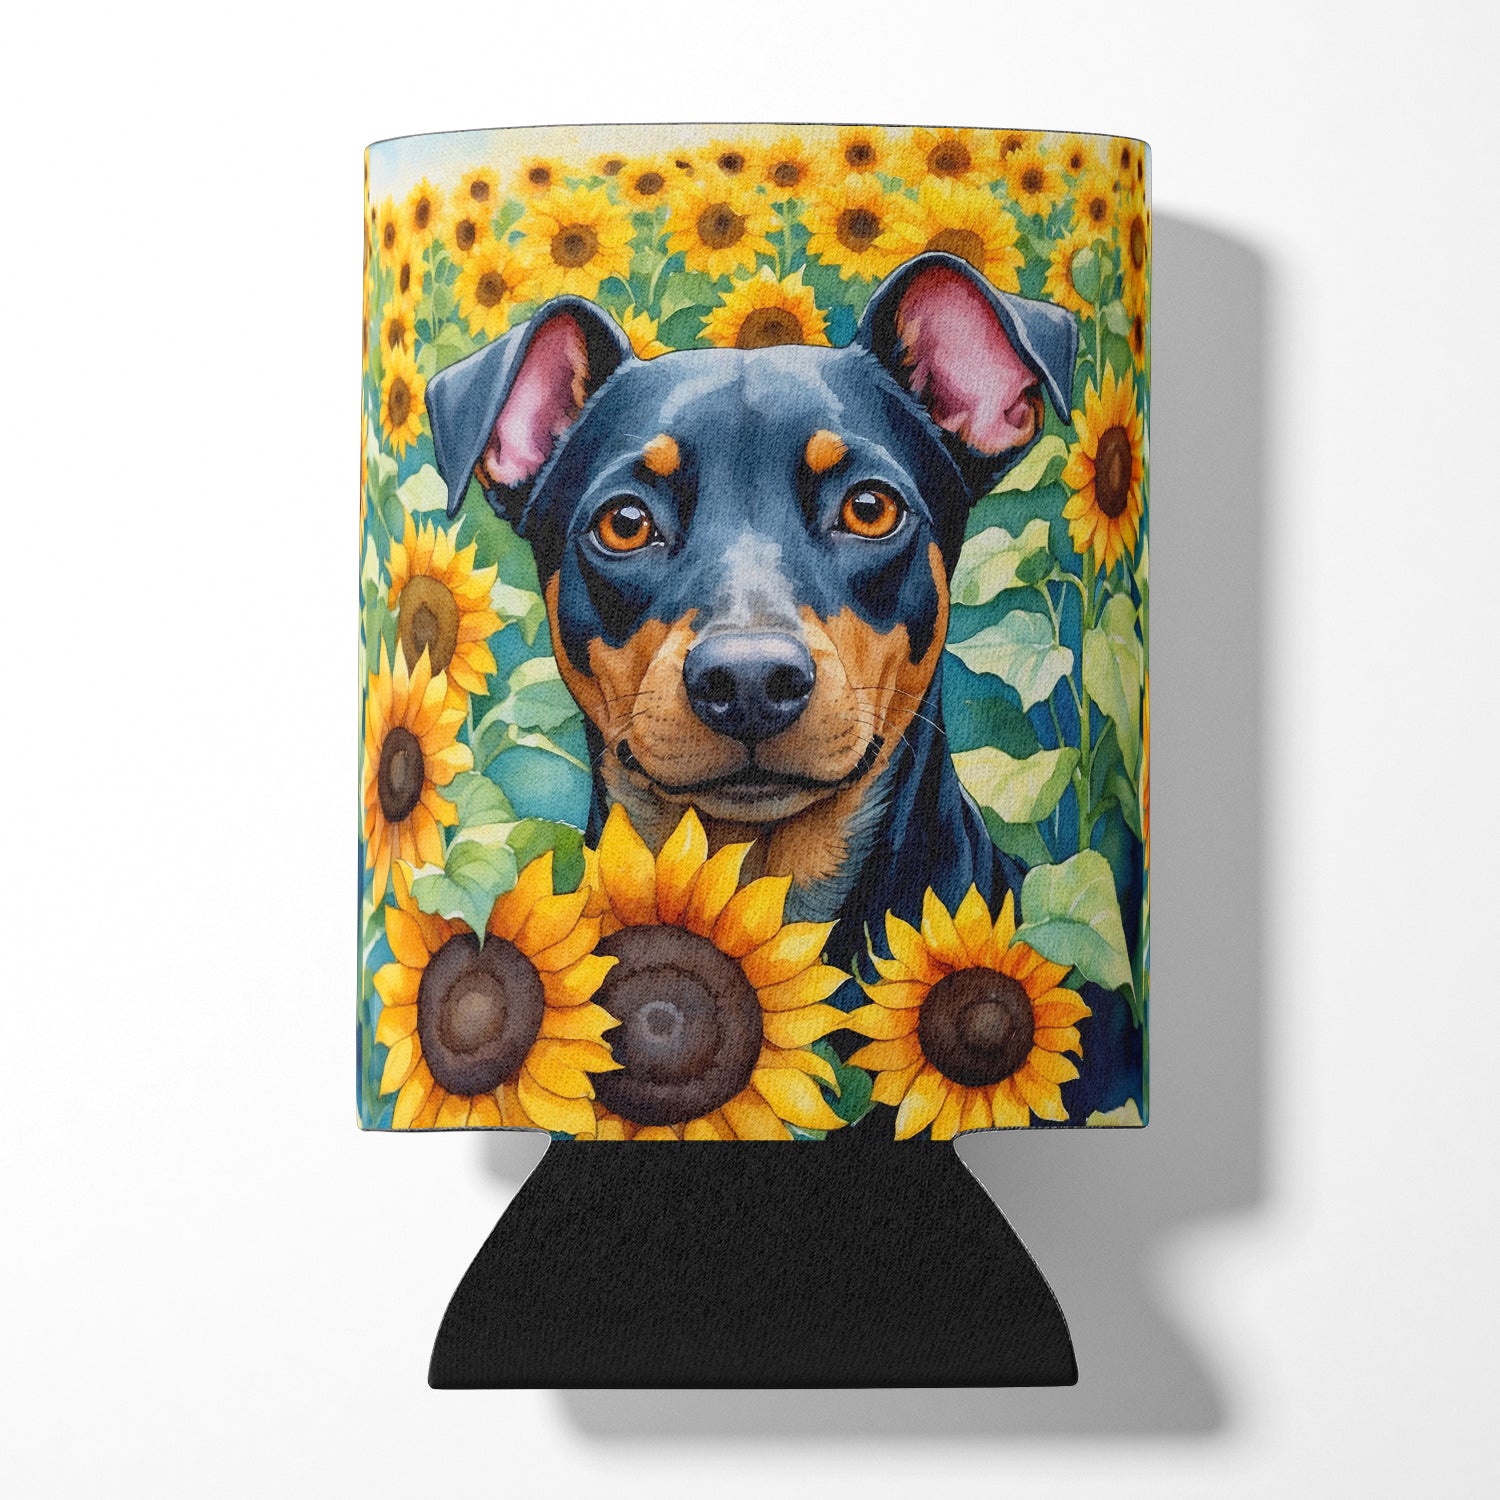 Buy this Manchester Terrier in Sunflowers Can or Bottle Hugger